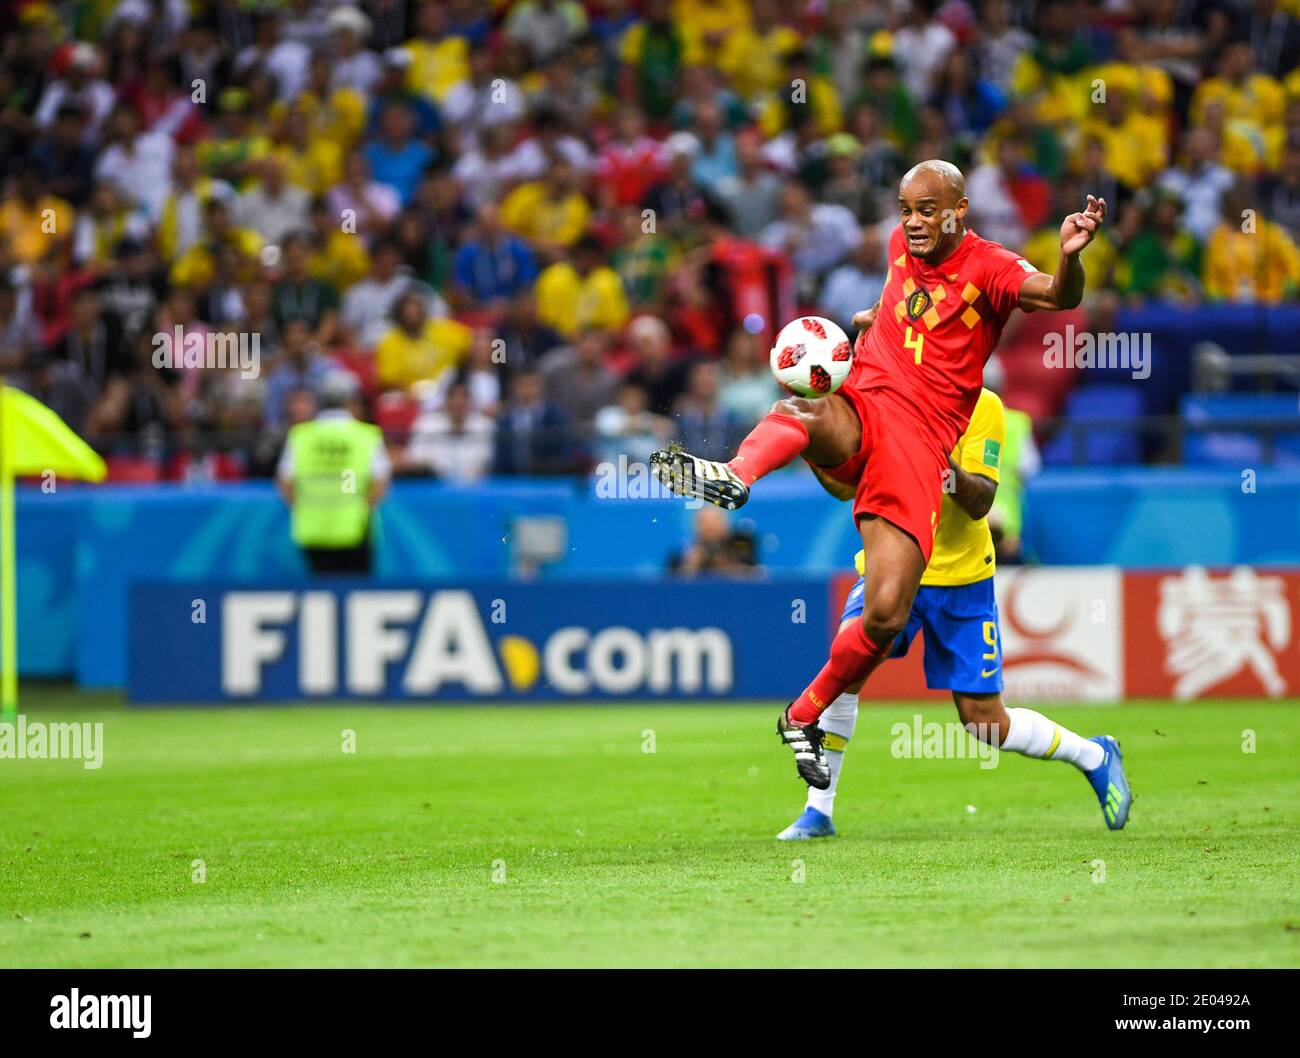 KAZAN, RUSSIA 6 July 2018: Vincent Kompany of Belgium is diving for ball during the 2018 FIFA World Cup Russia Quarter Final match between Brazil and Stock Photo